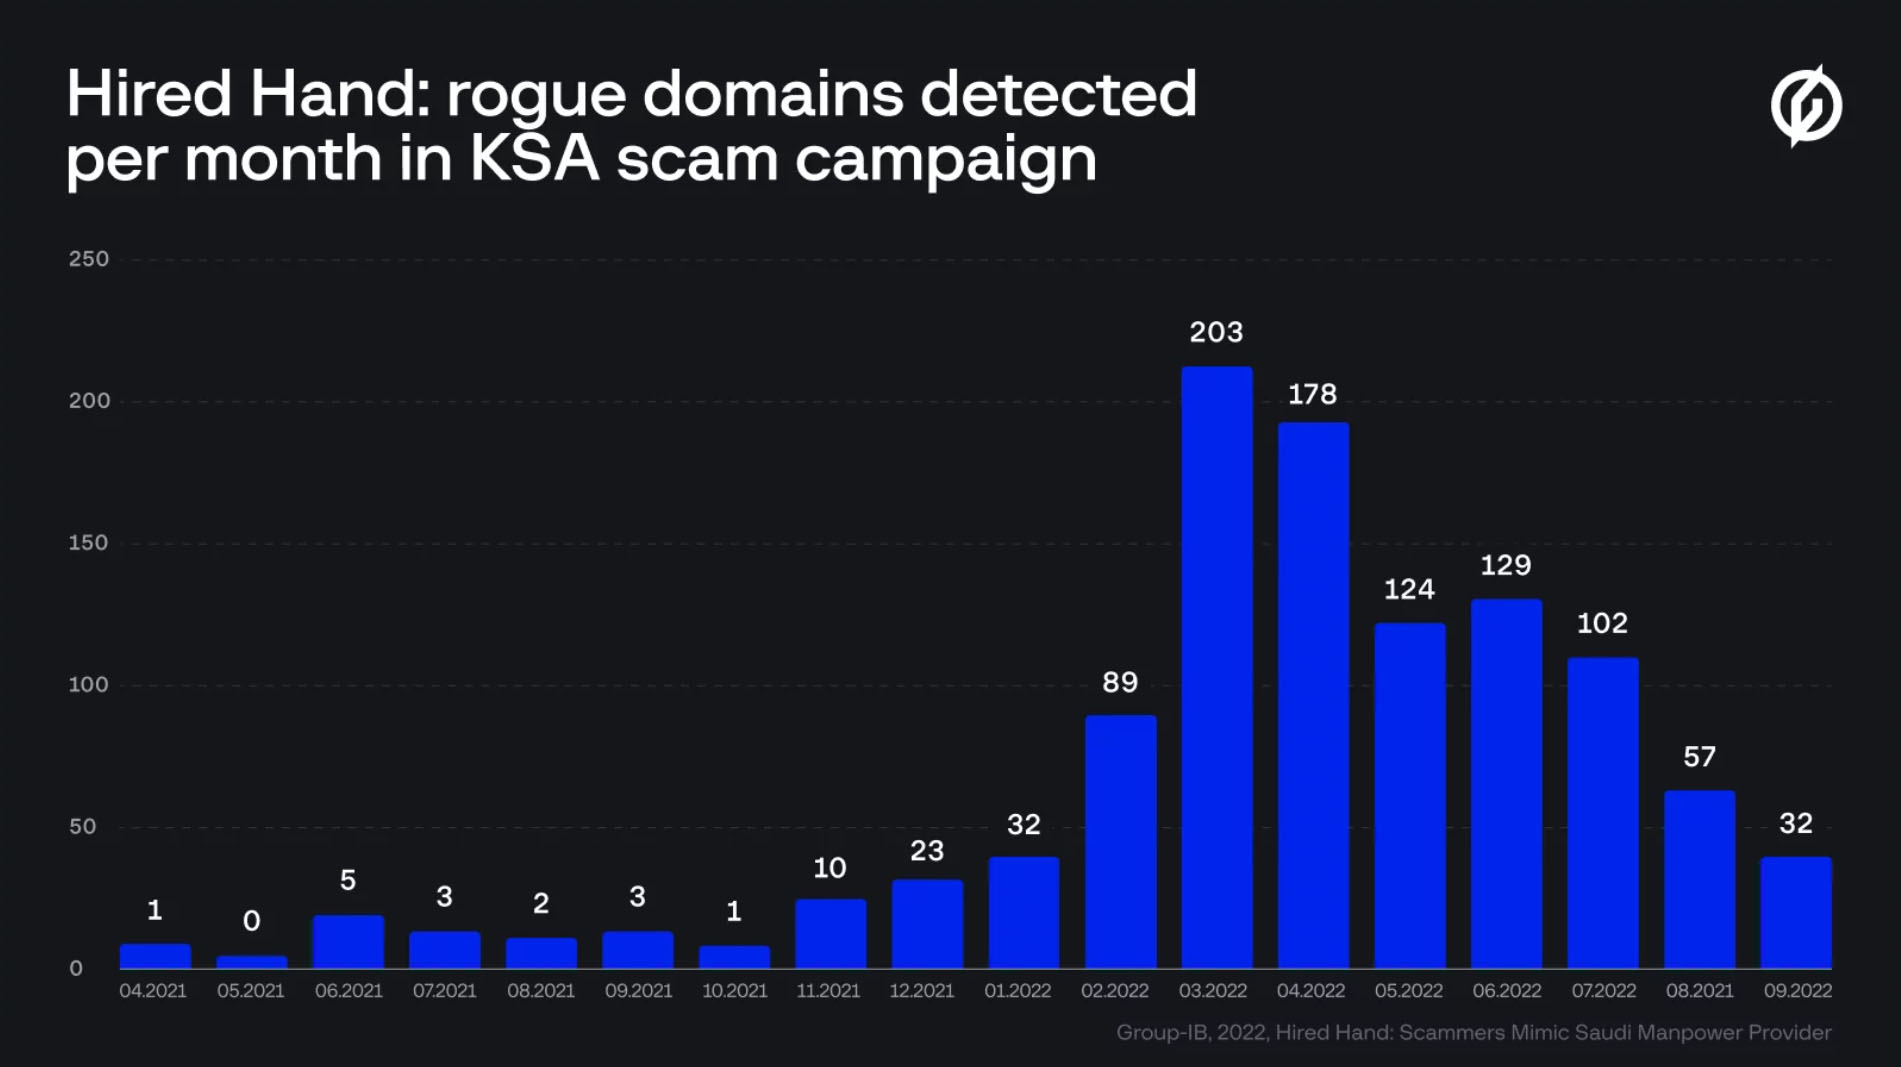 rogue domains detected in saudi arabia scam campaign